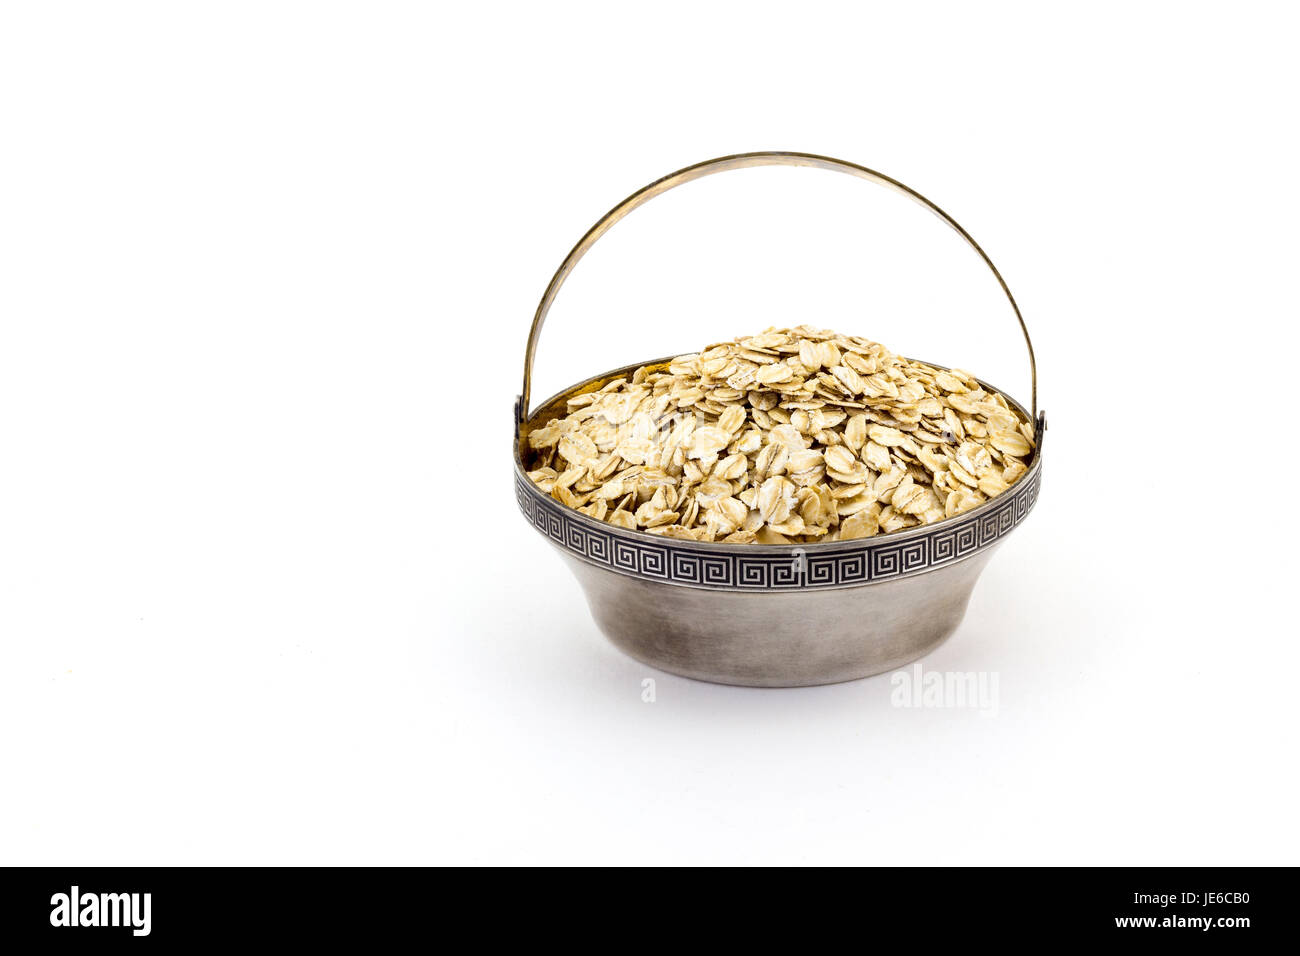 a silver bowl of uncooked rolled oats isolated on white background Stock Photo